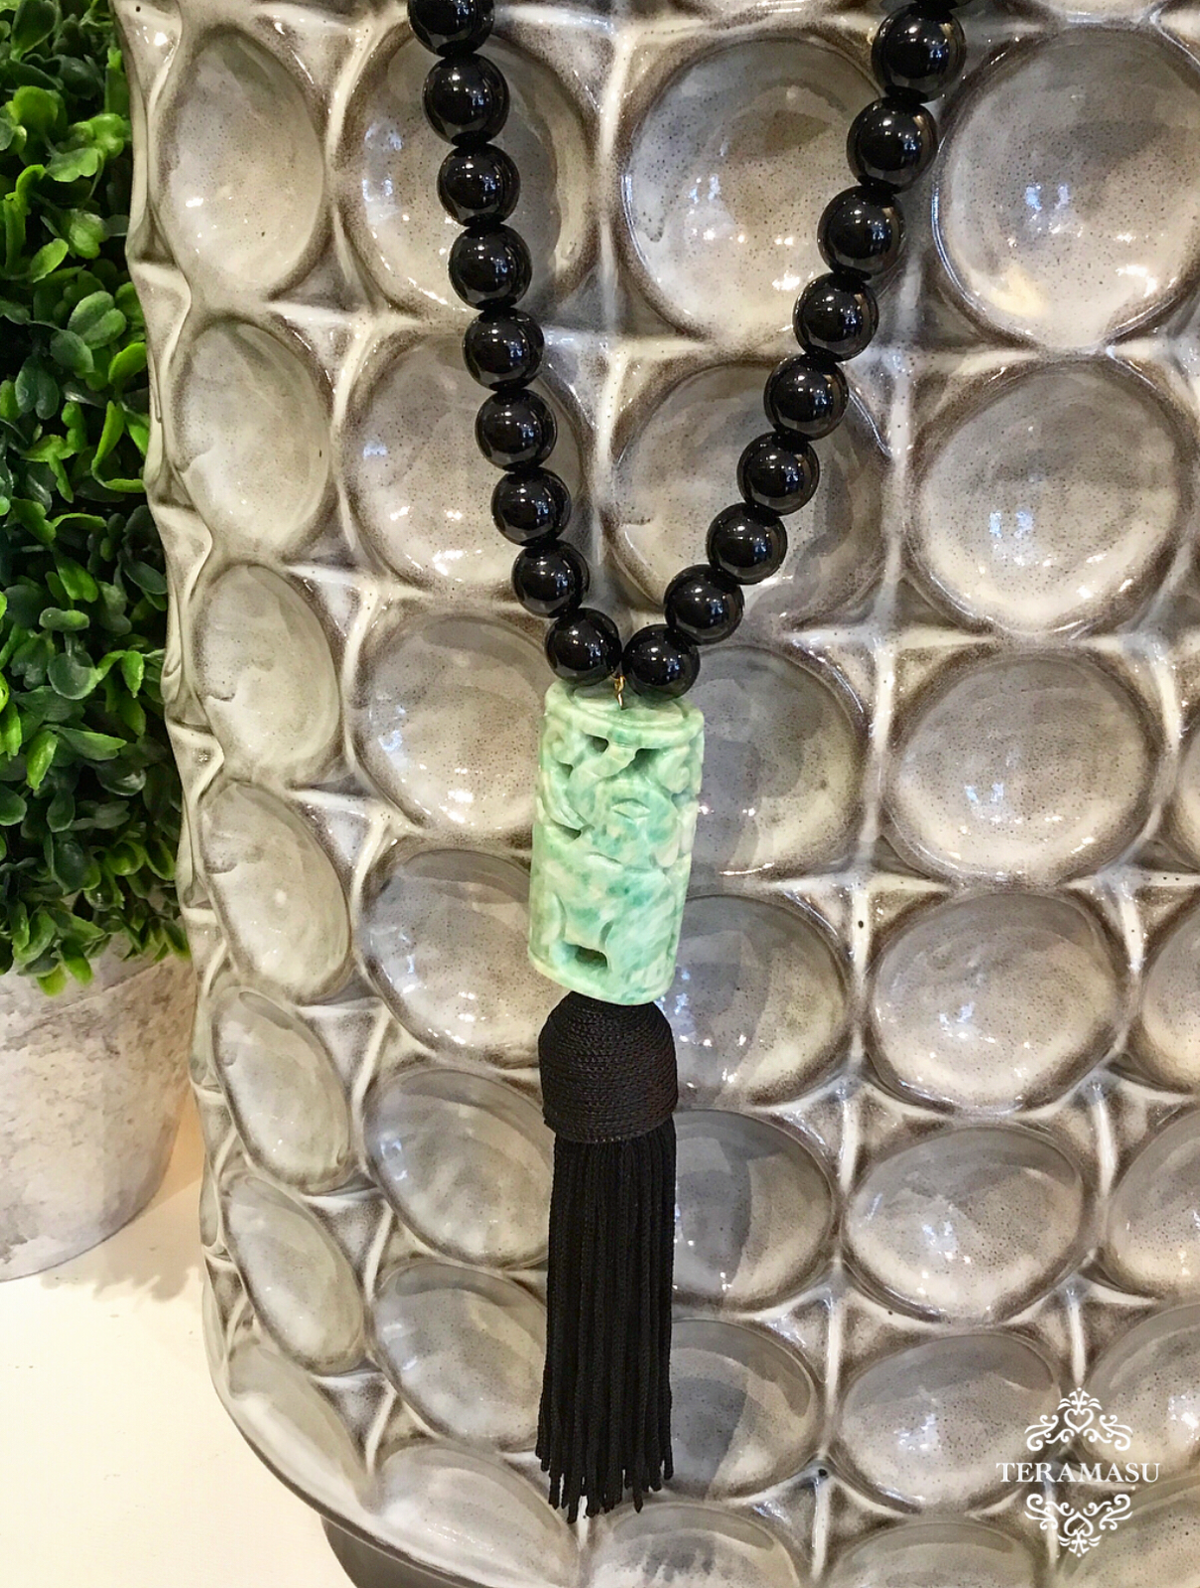 Saturday Stunner: Gorgeous & New Teramasu Black Onyx Necklace with Carved Jade and Black Tassel Pendant